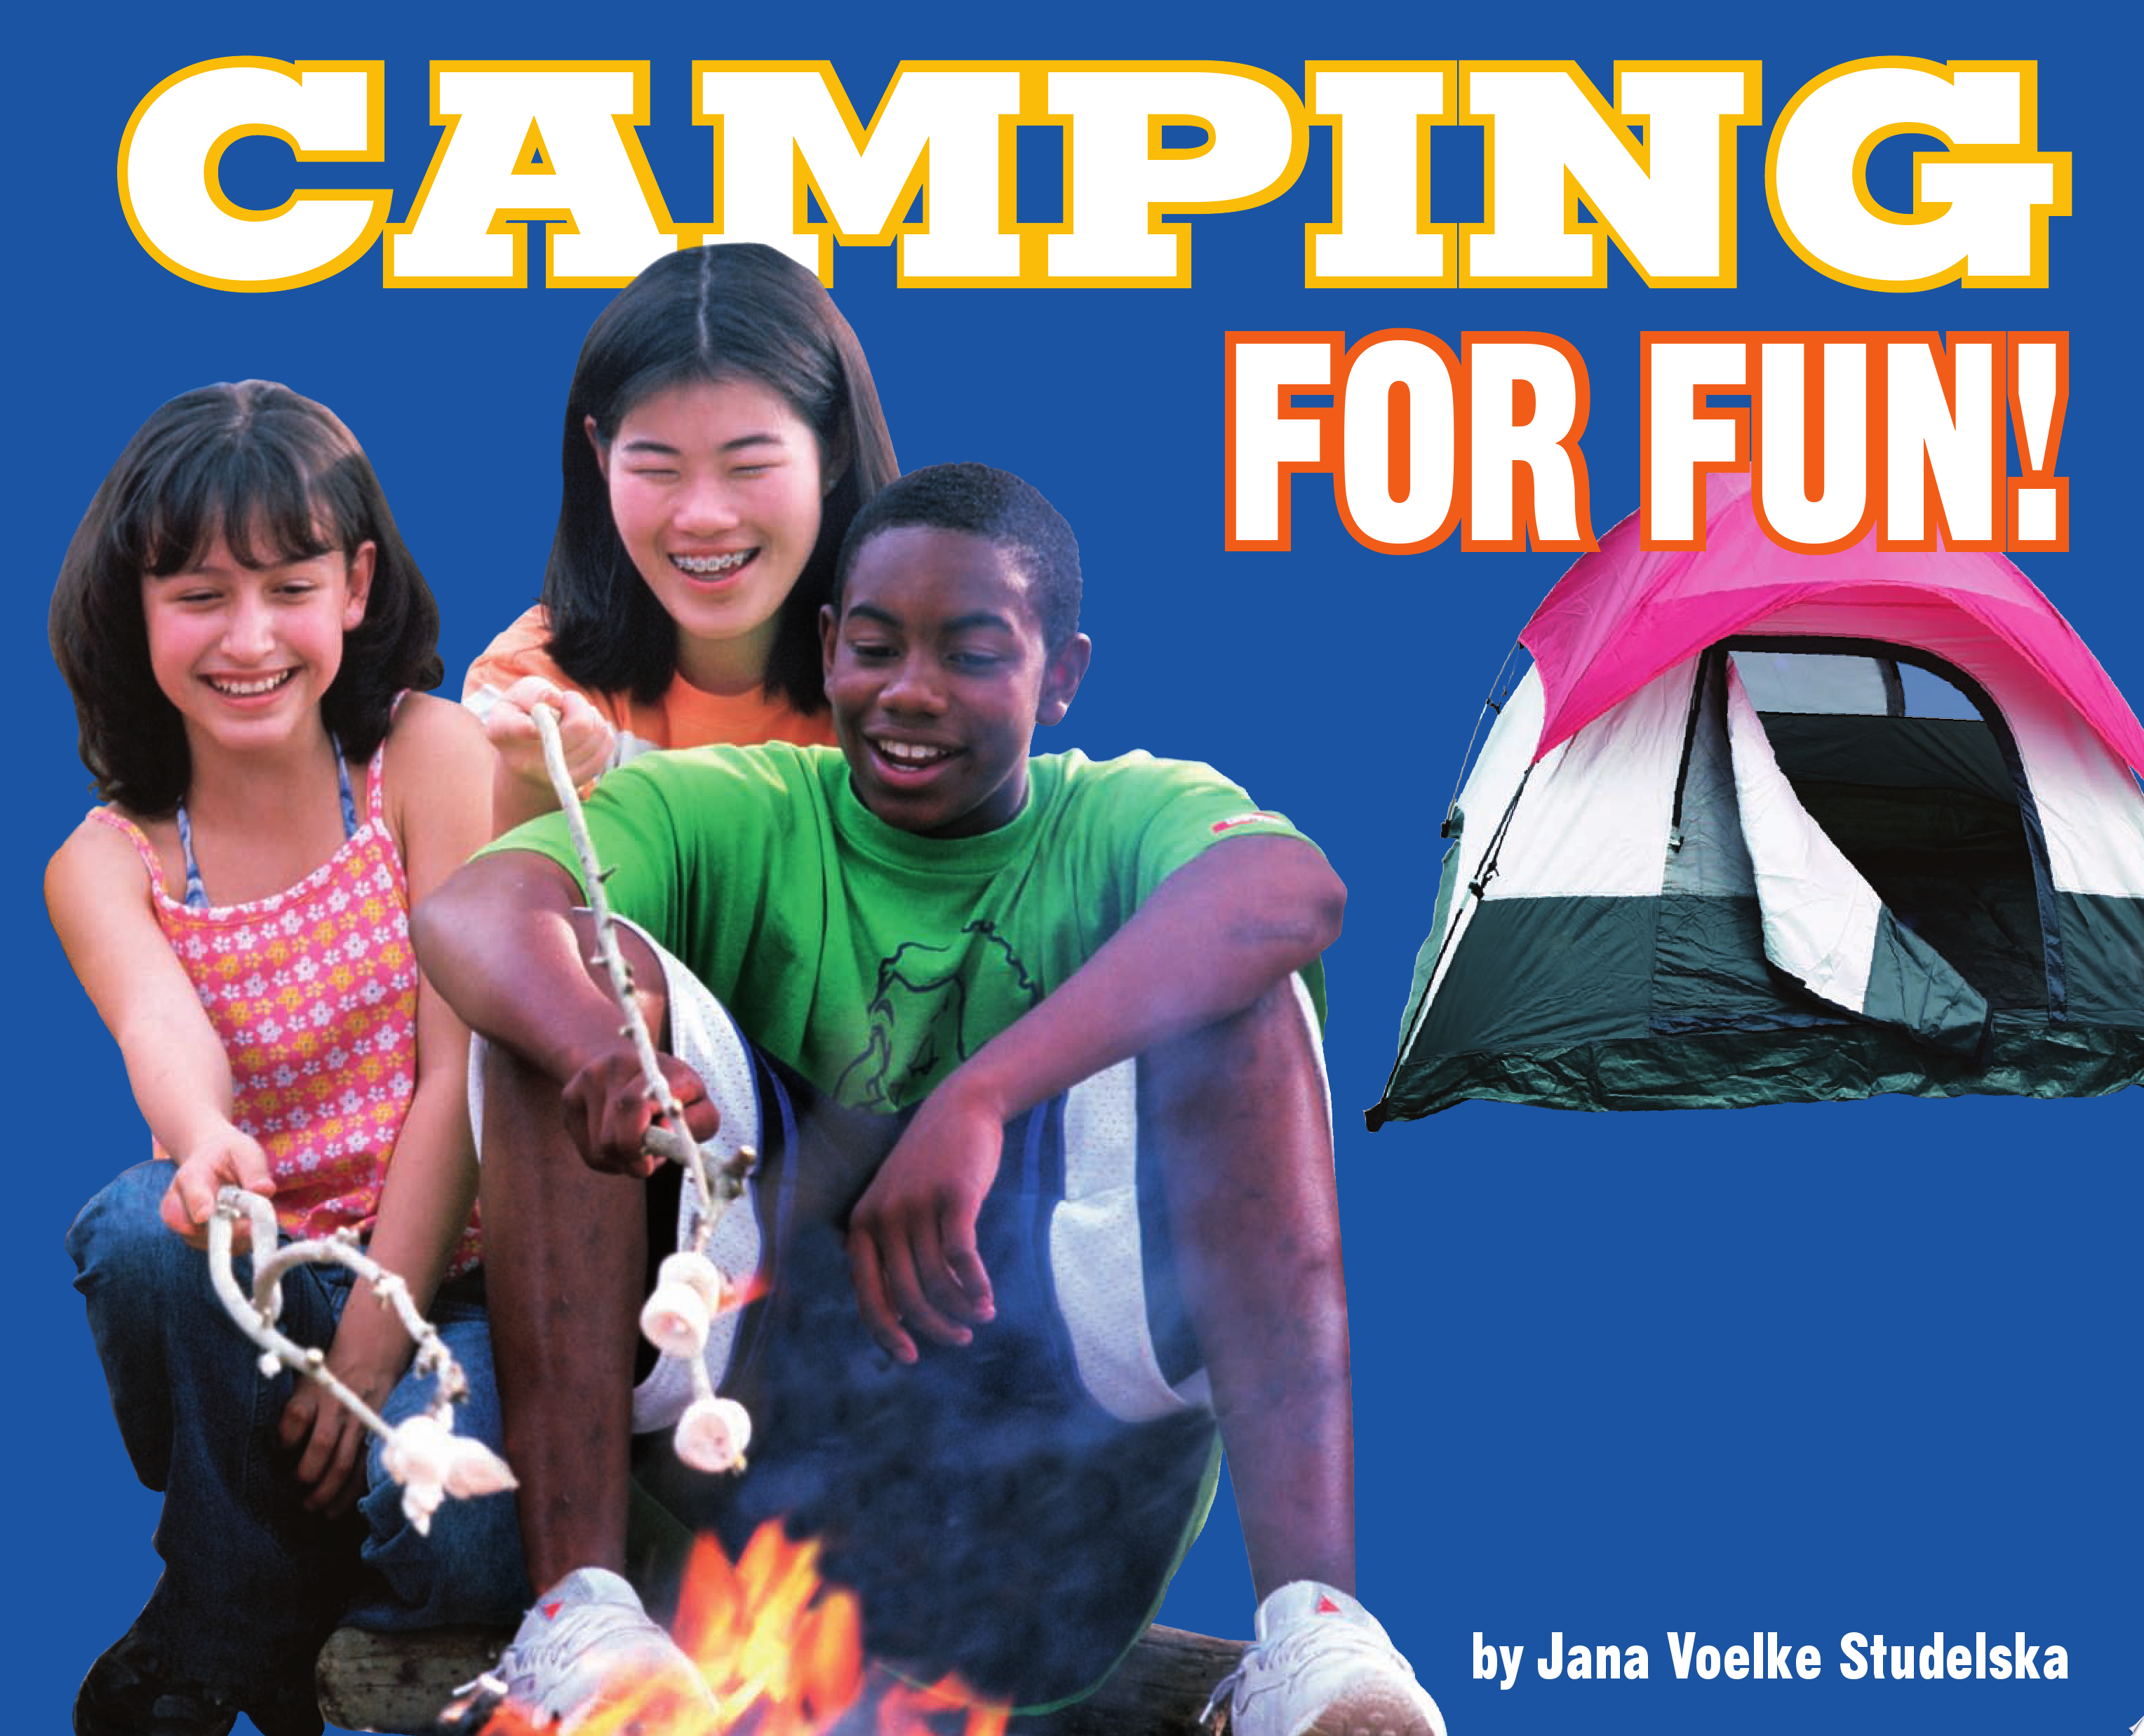 Image for "Camping for Fun!"